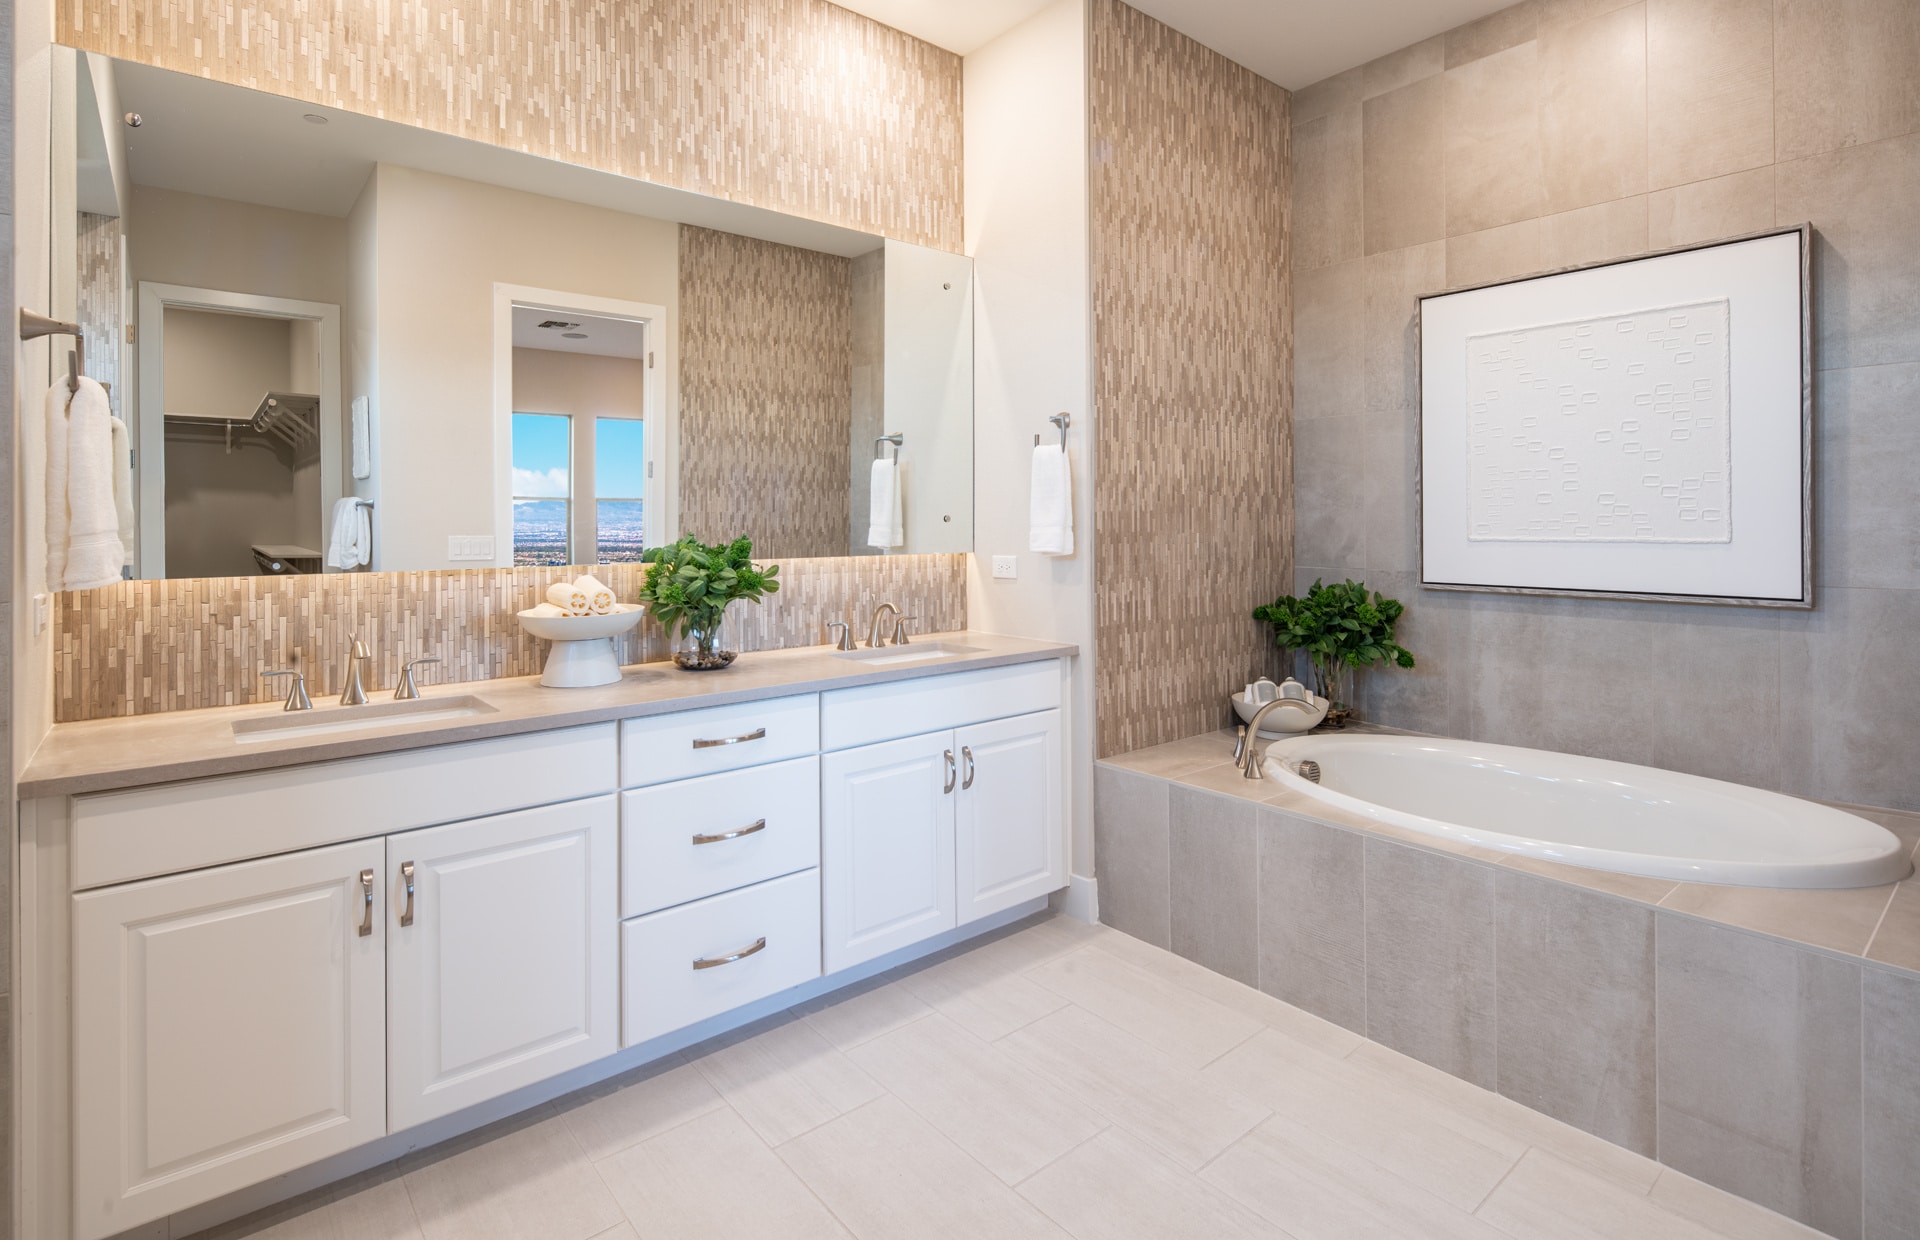 Primary Bathroom of Cesena Model at Carmel Cliff by Pulte Homes